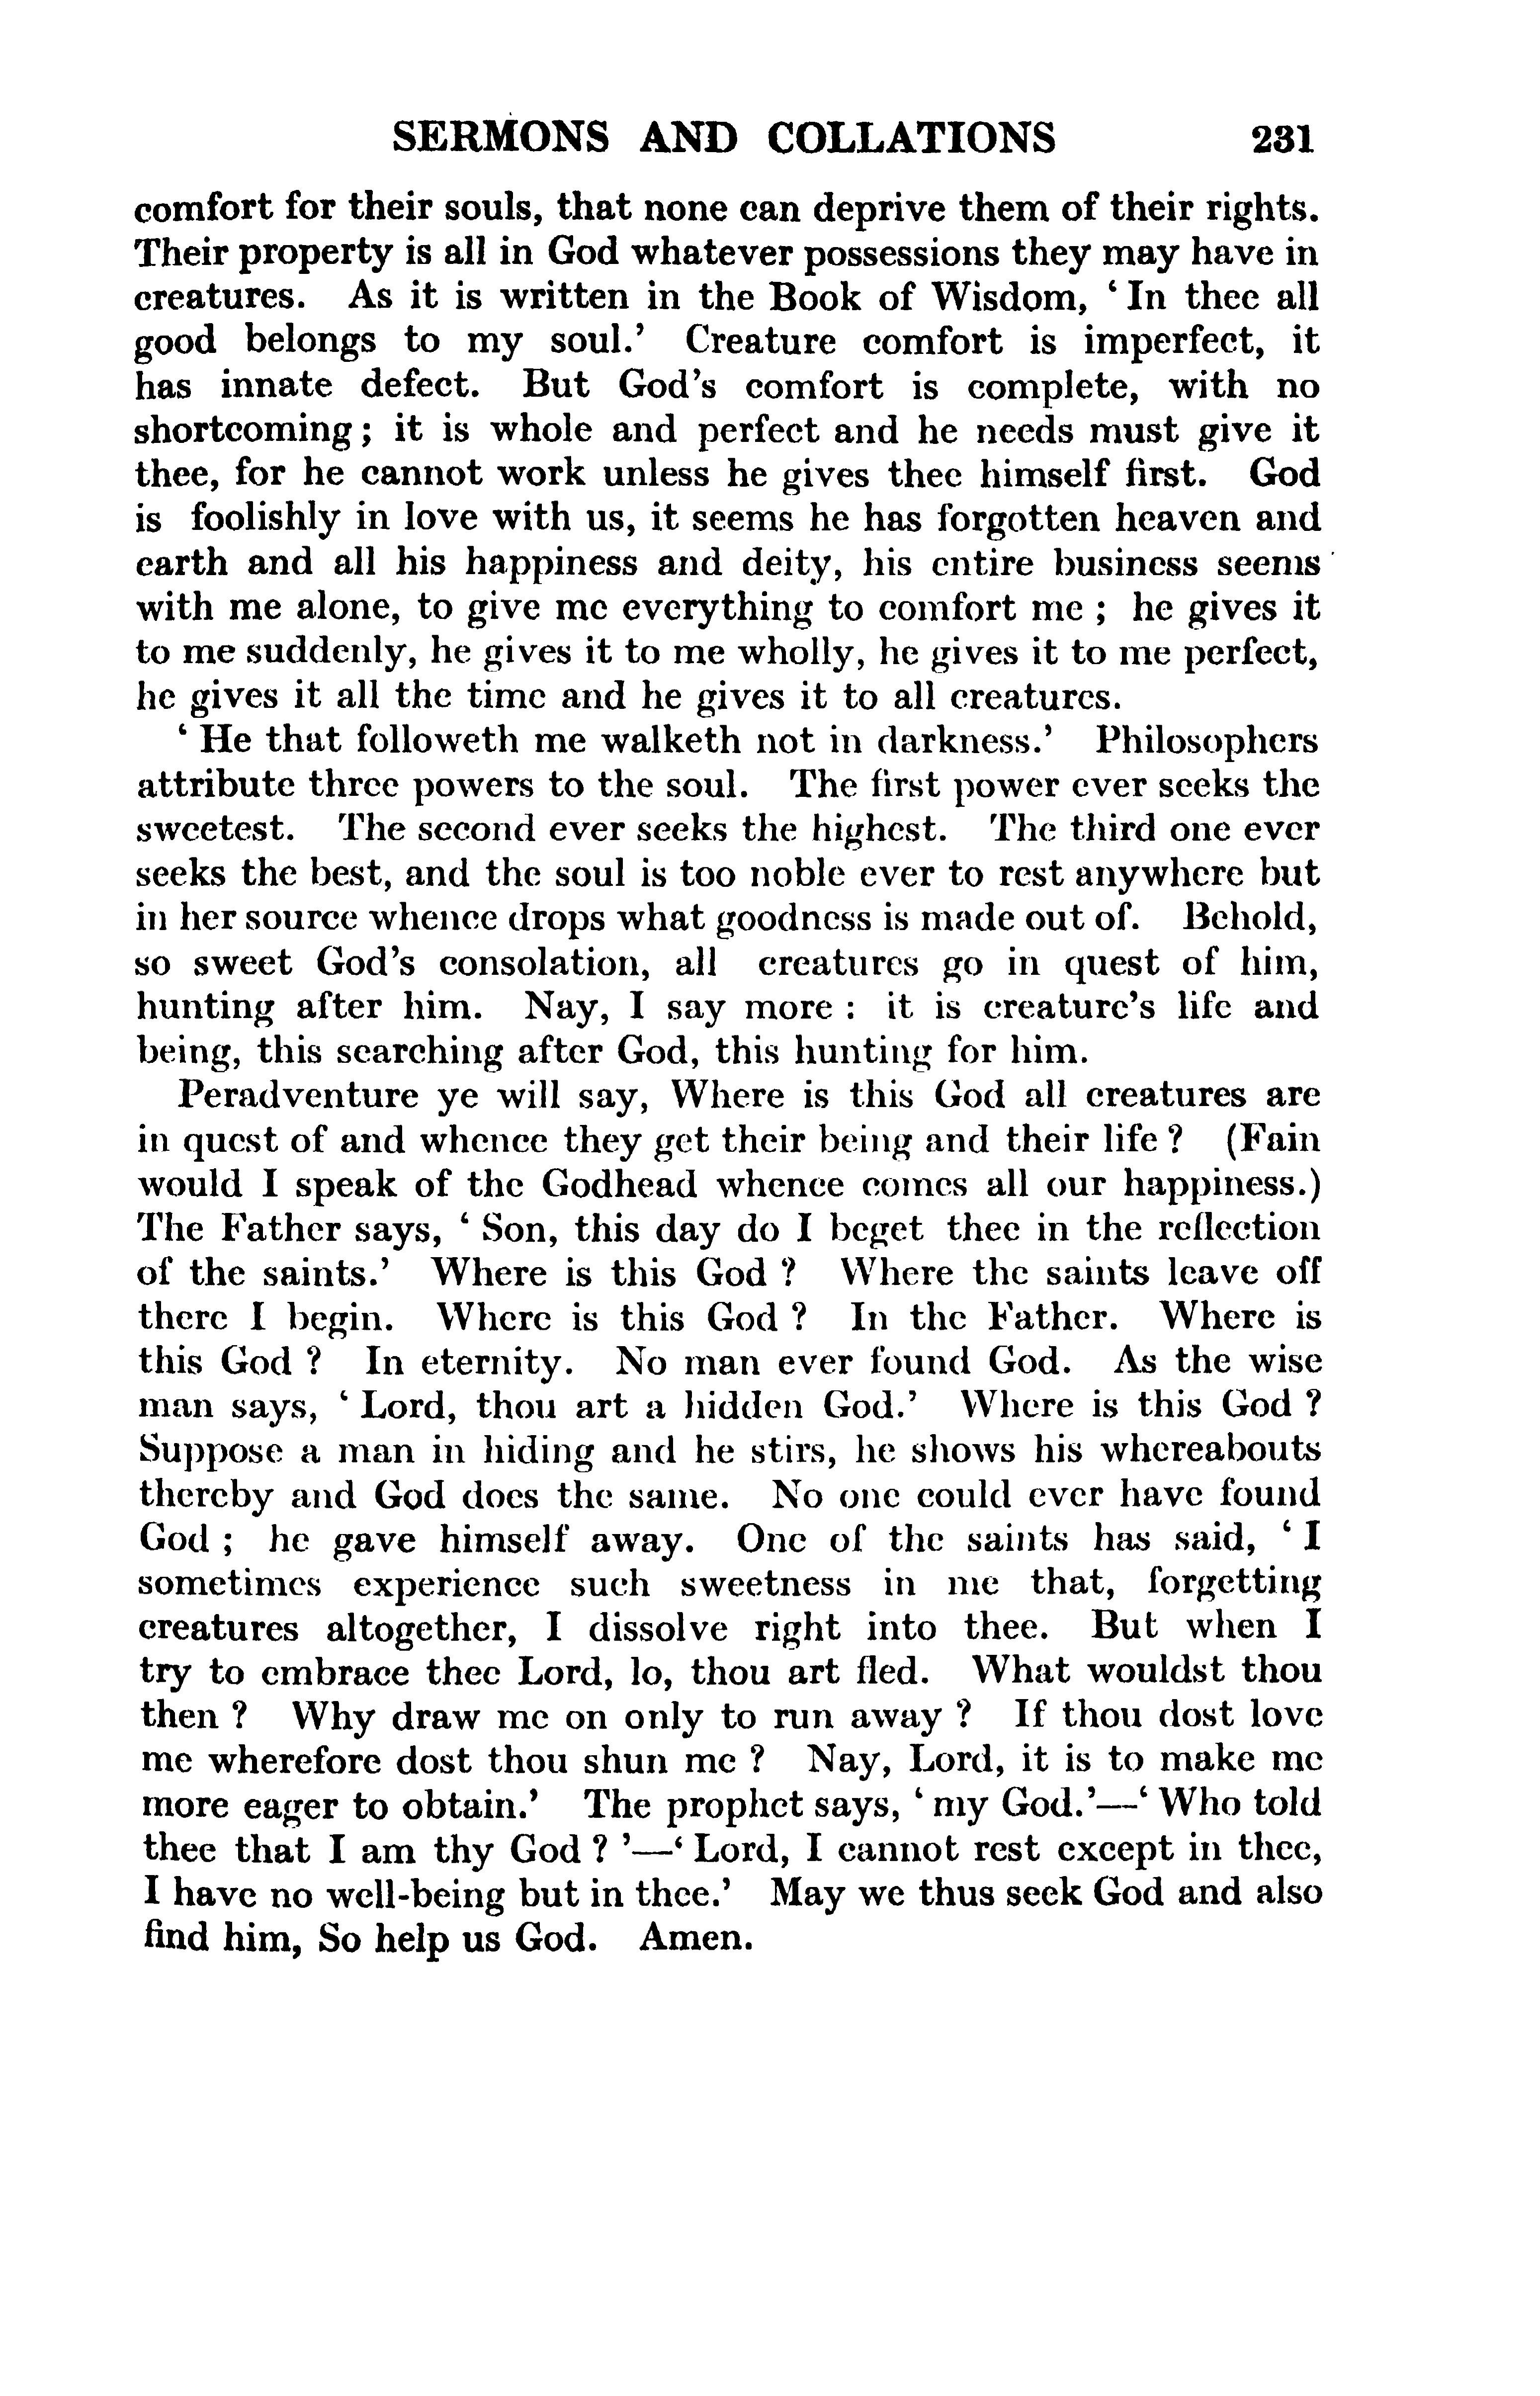 Image of page 0255